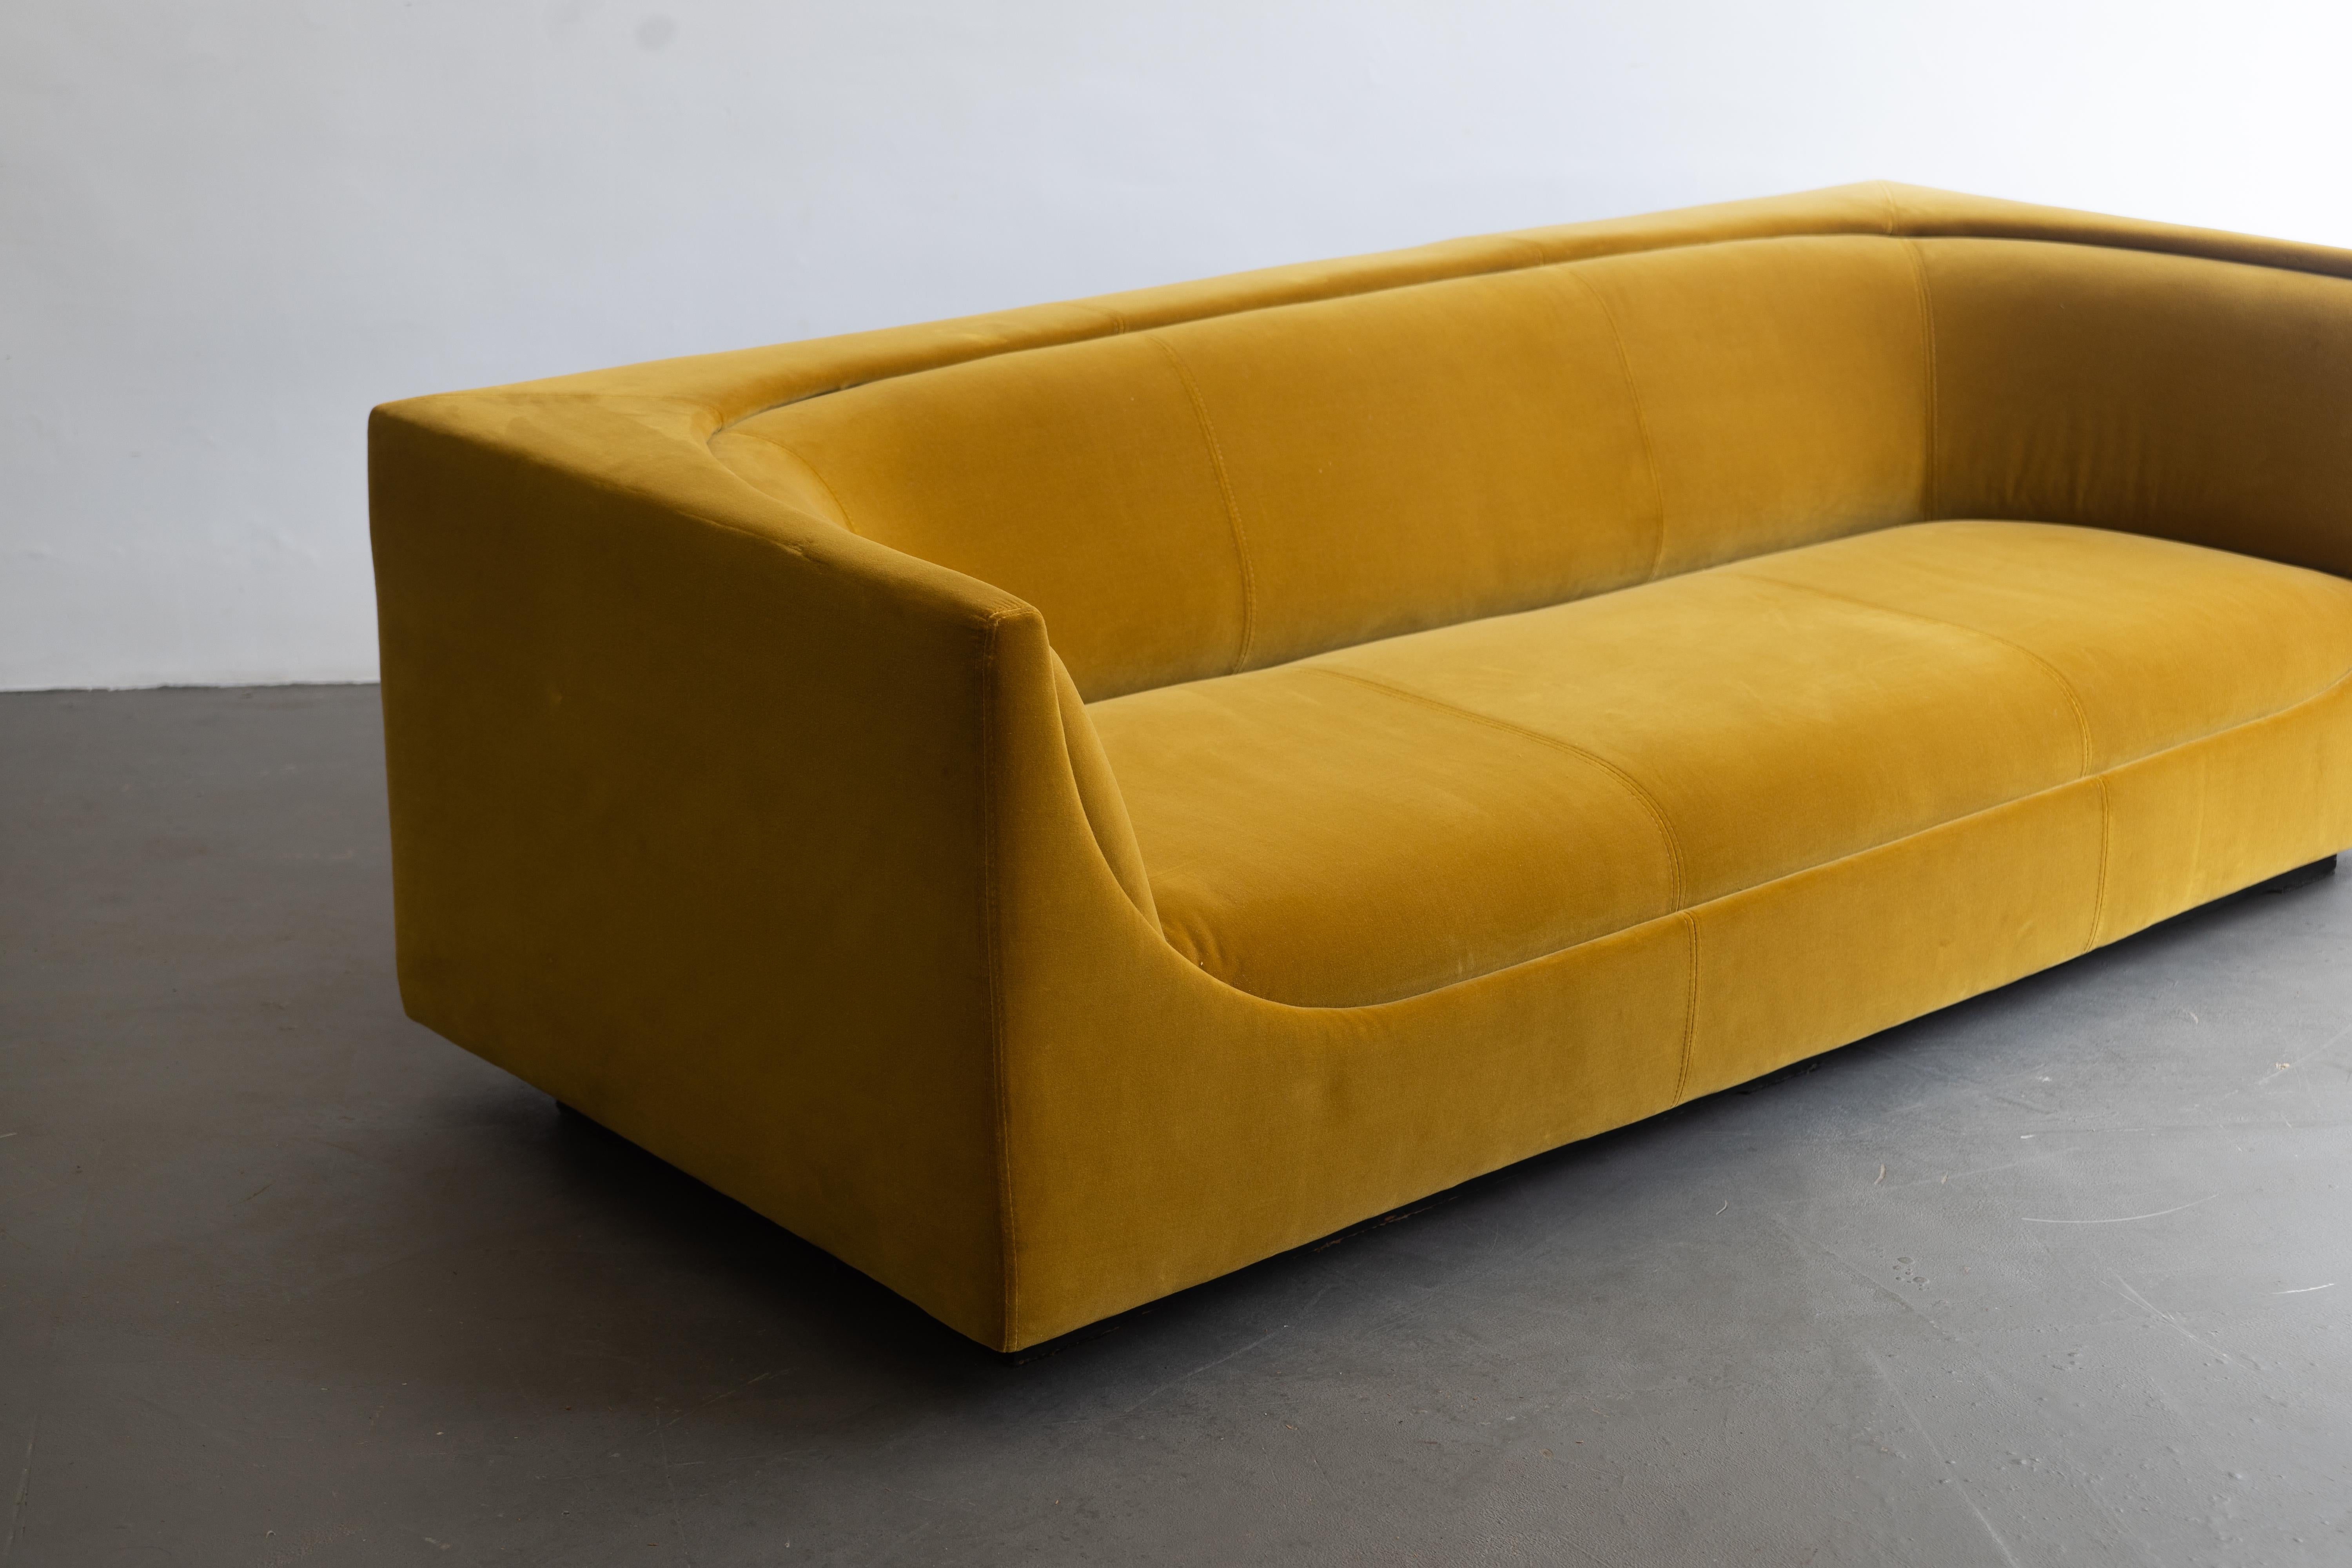 Recently upholstery Cubo (Cube) sofa designed by Jorge Zalszupin at the ends of 1970. The sofa it’s part of a collection composed of coffee table and armchairs.

The elegance, a feature of Zalzuspin designs, on this piece it does not come from